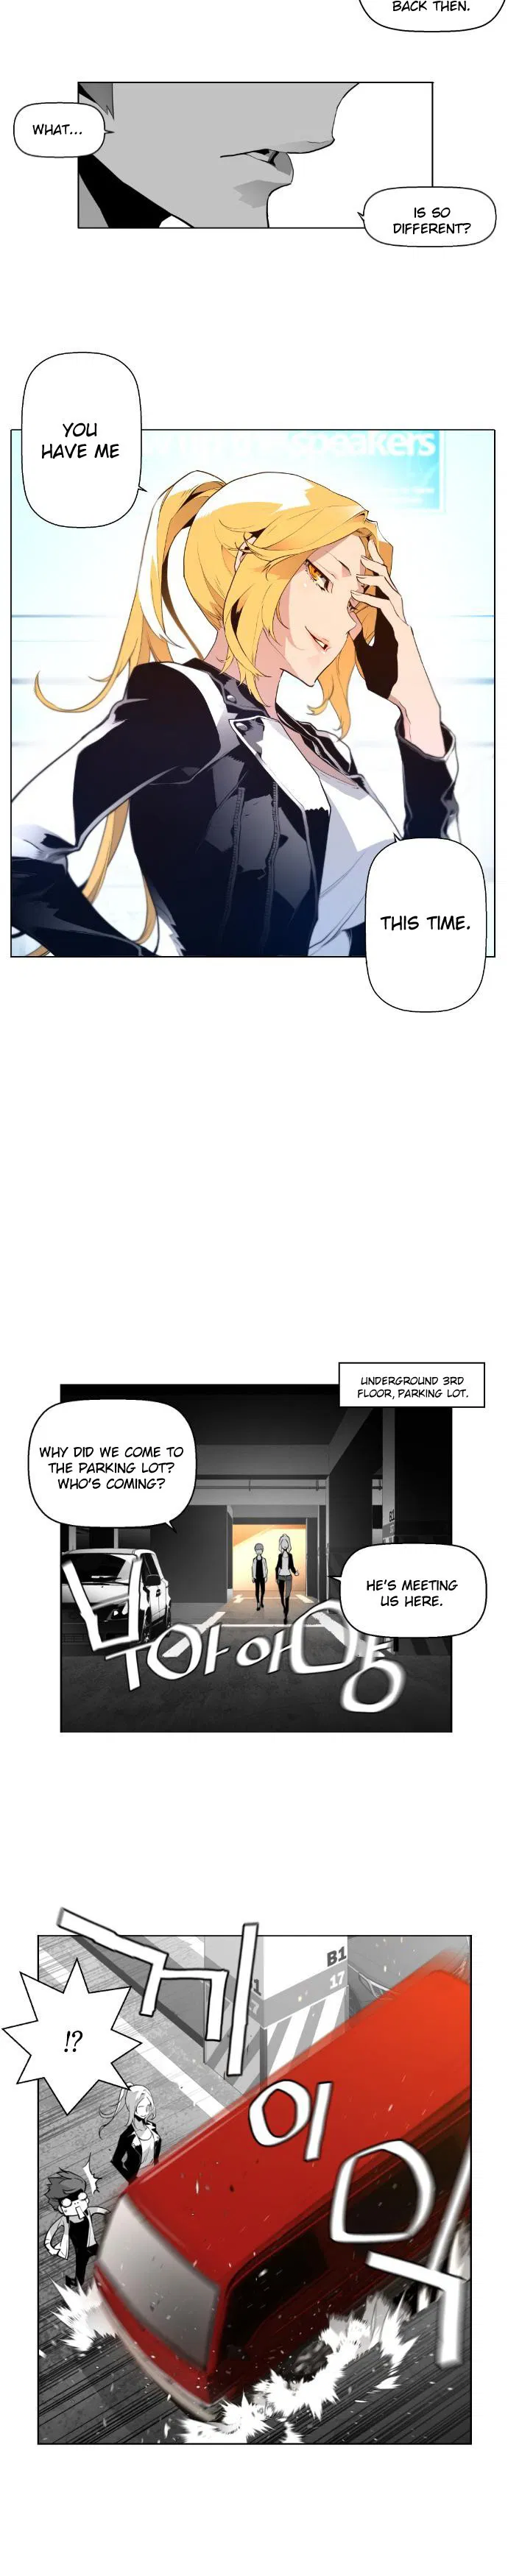 Terror Man Chapter 1 page 25